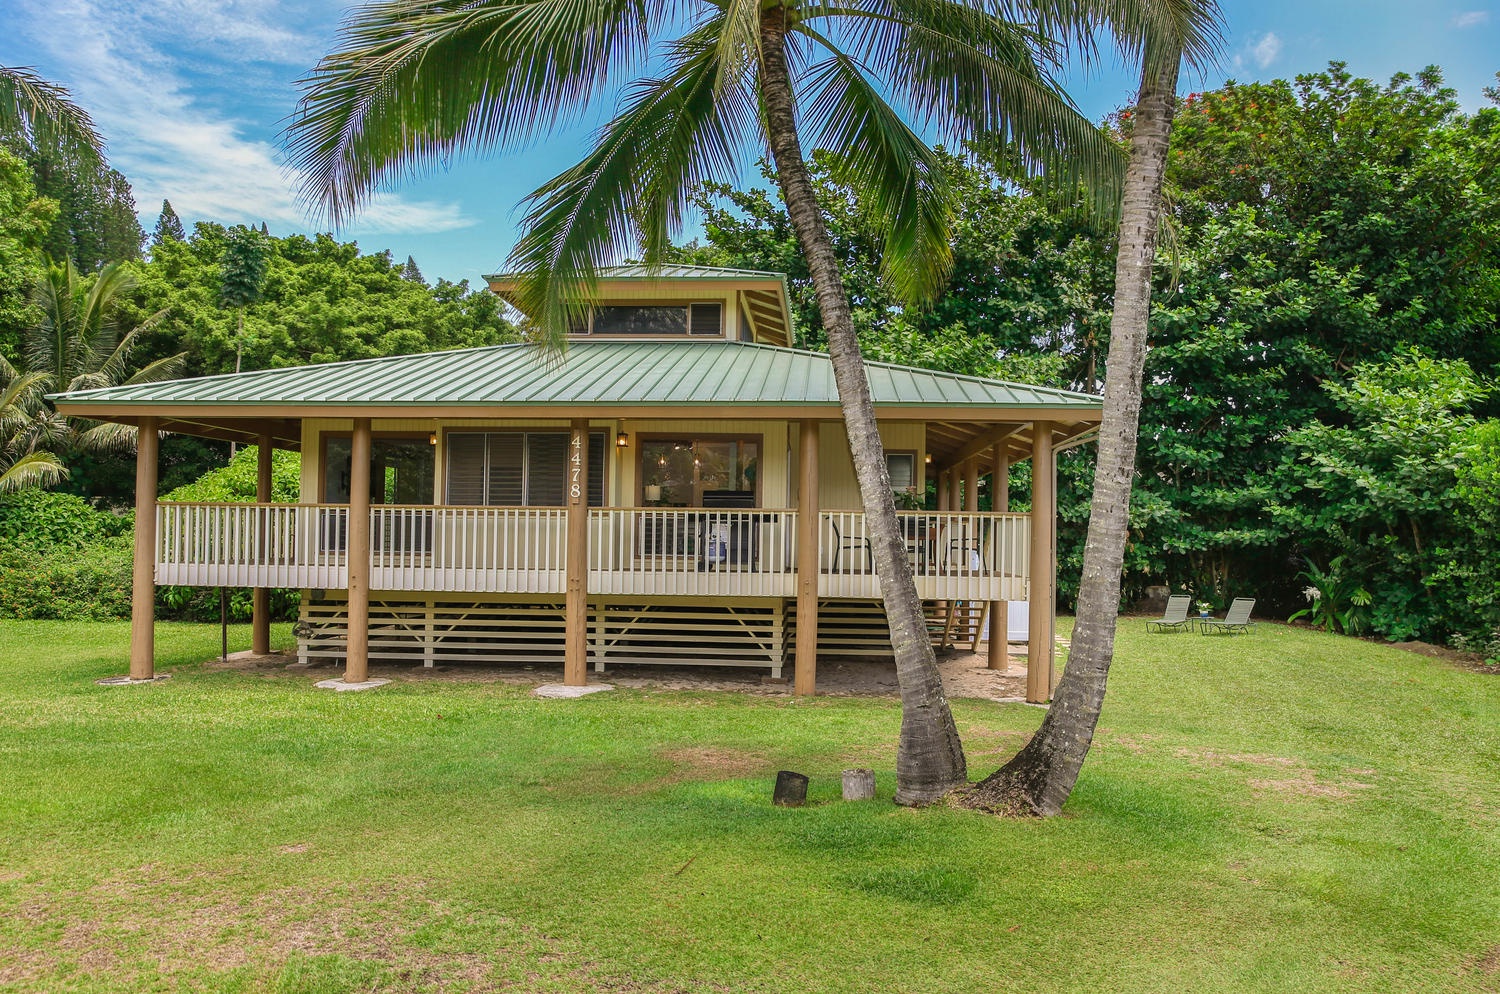 Hanalei Vacation Rentals, Hallor House TVNC #5147 - Front view of Hallor Hale